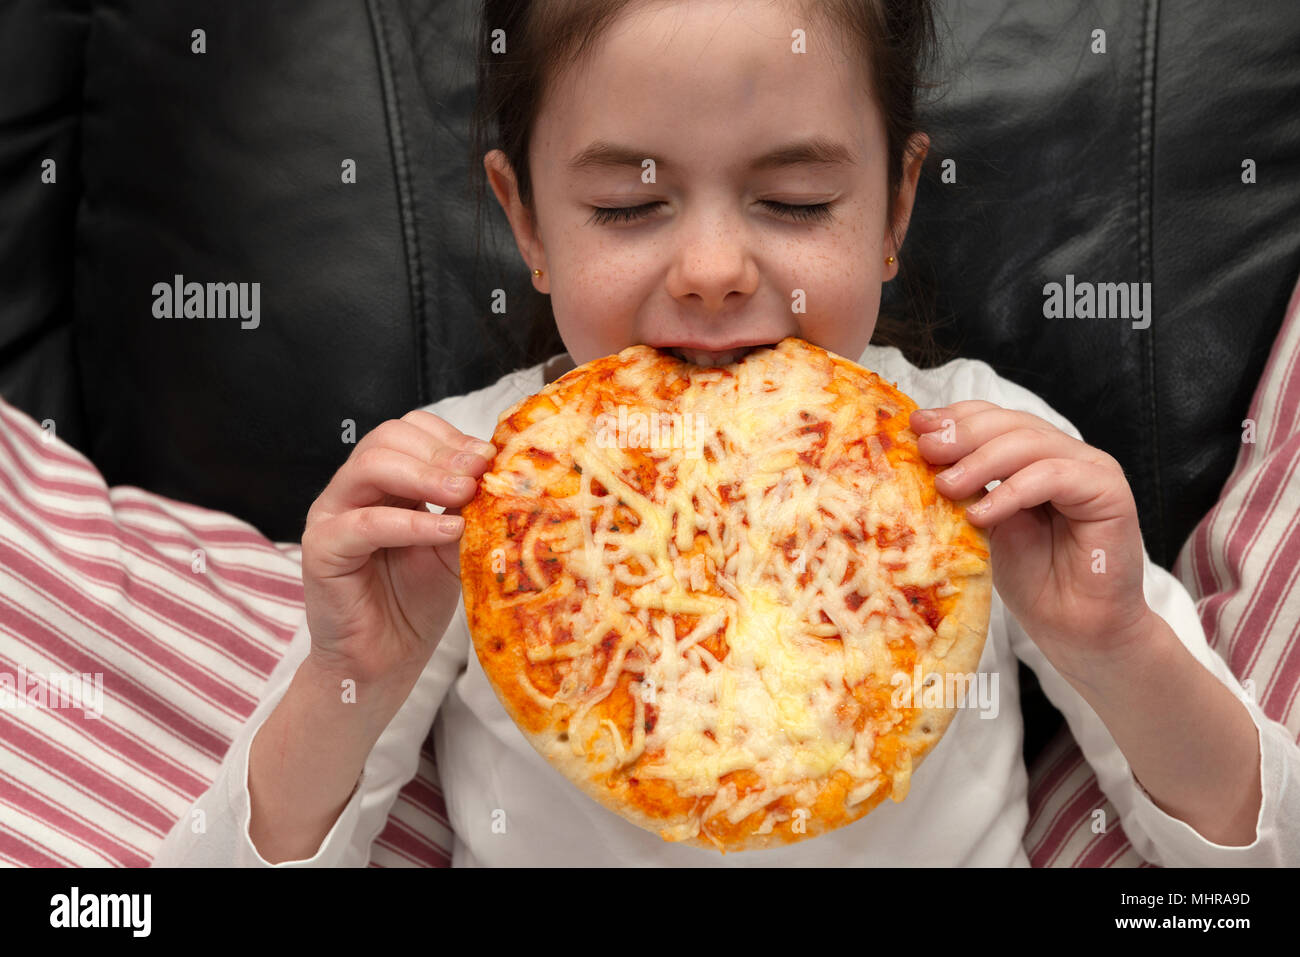 6-year old girl eating pizza Banque D'Images